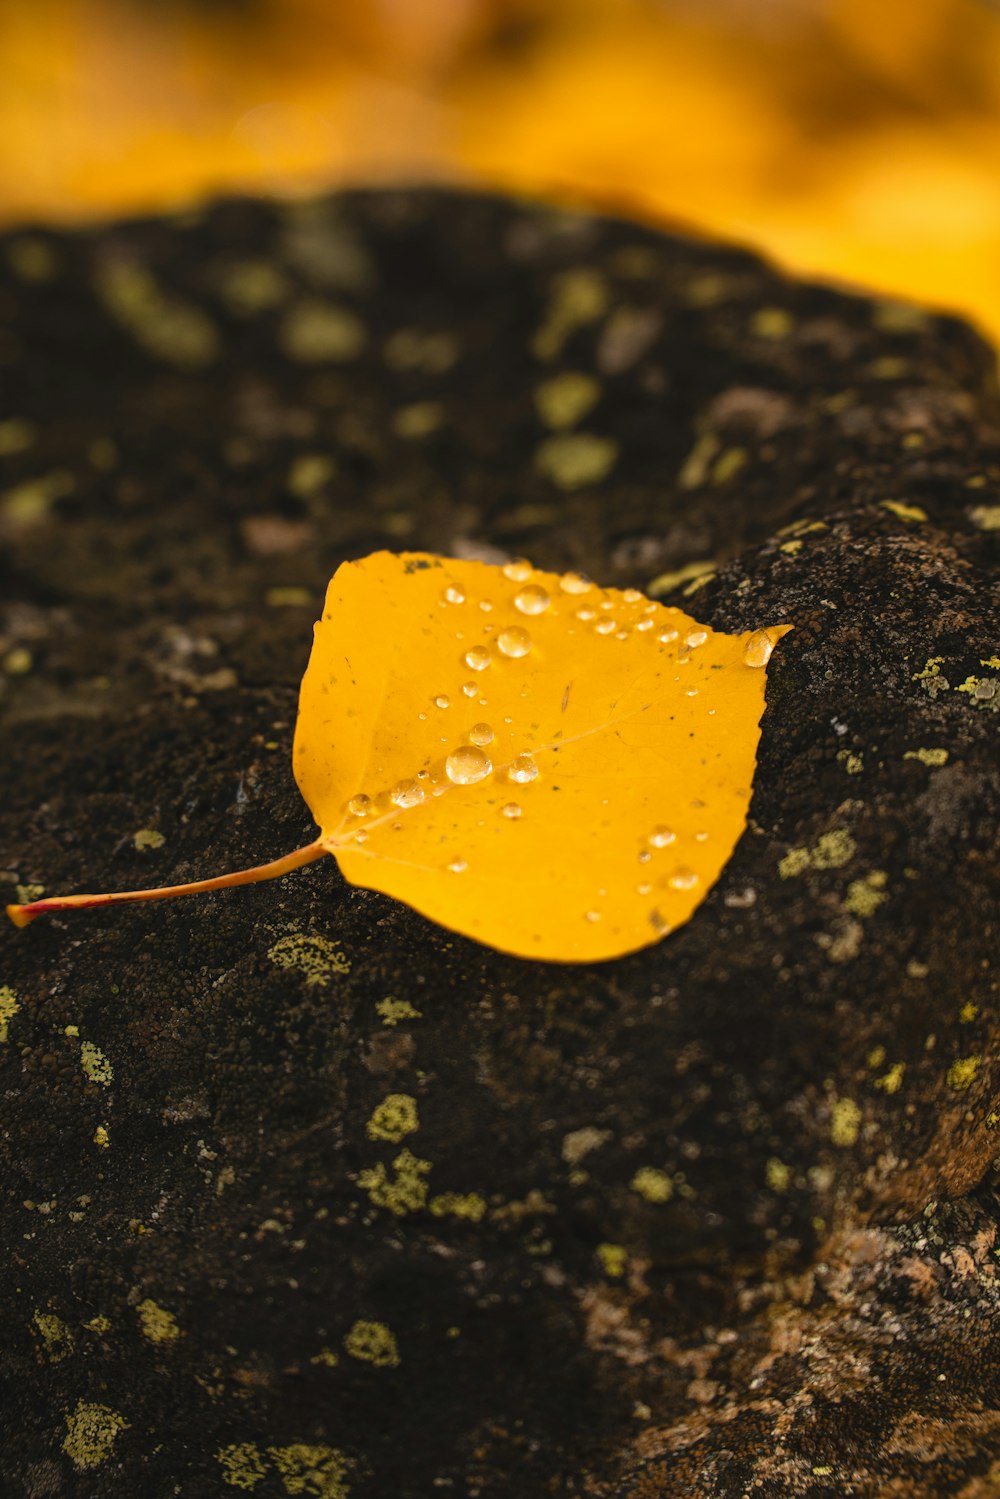 a yellow leaf on a rock with water droplets